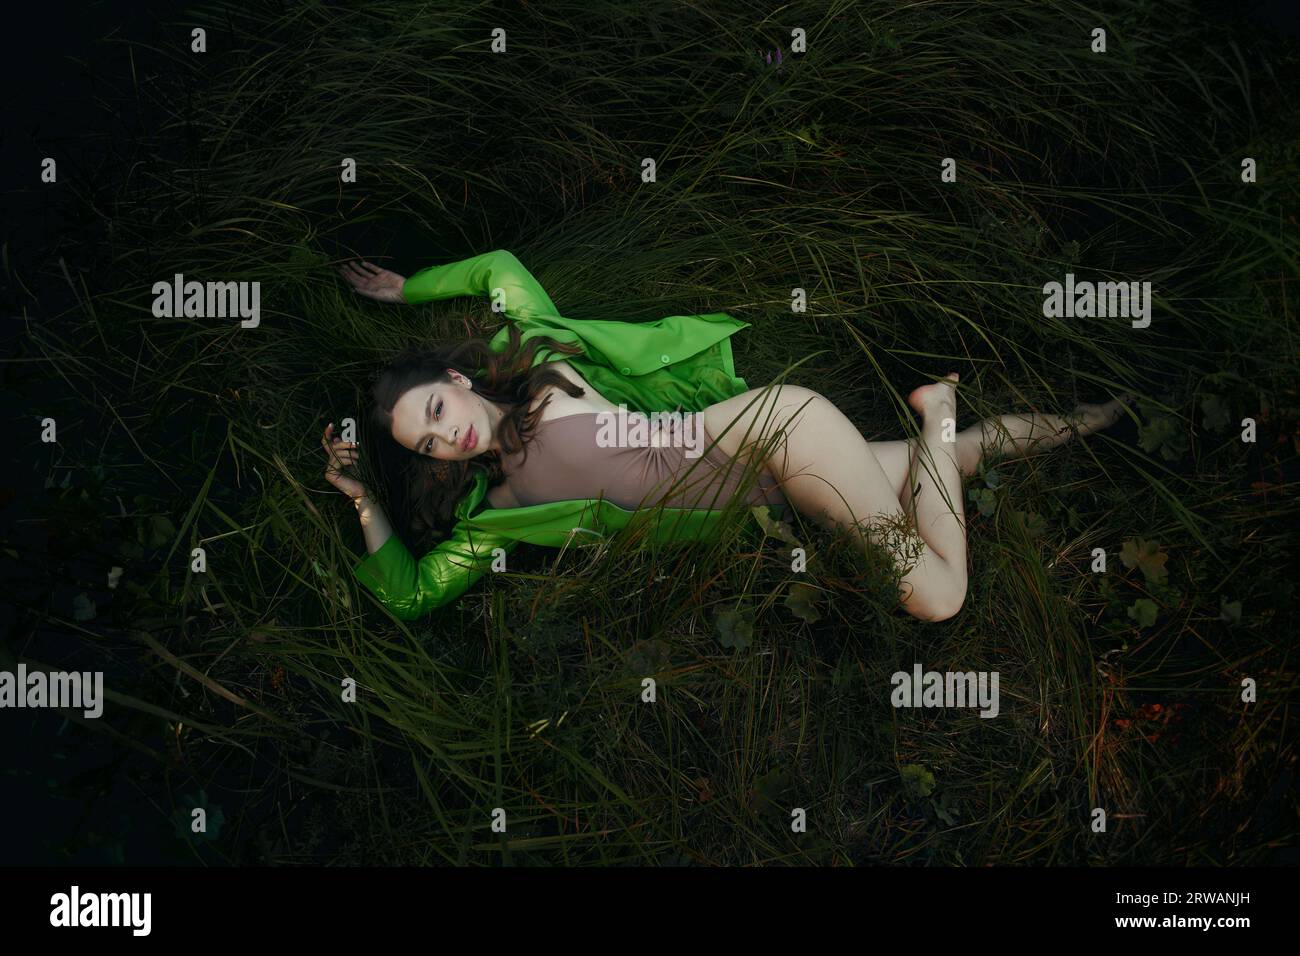 Young woman resting in grass near pond lake. Woman in beige bodysuit and green jacket poses, sensual appearance Stock Photo